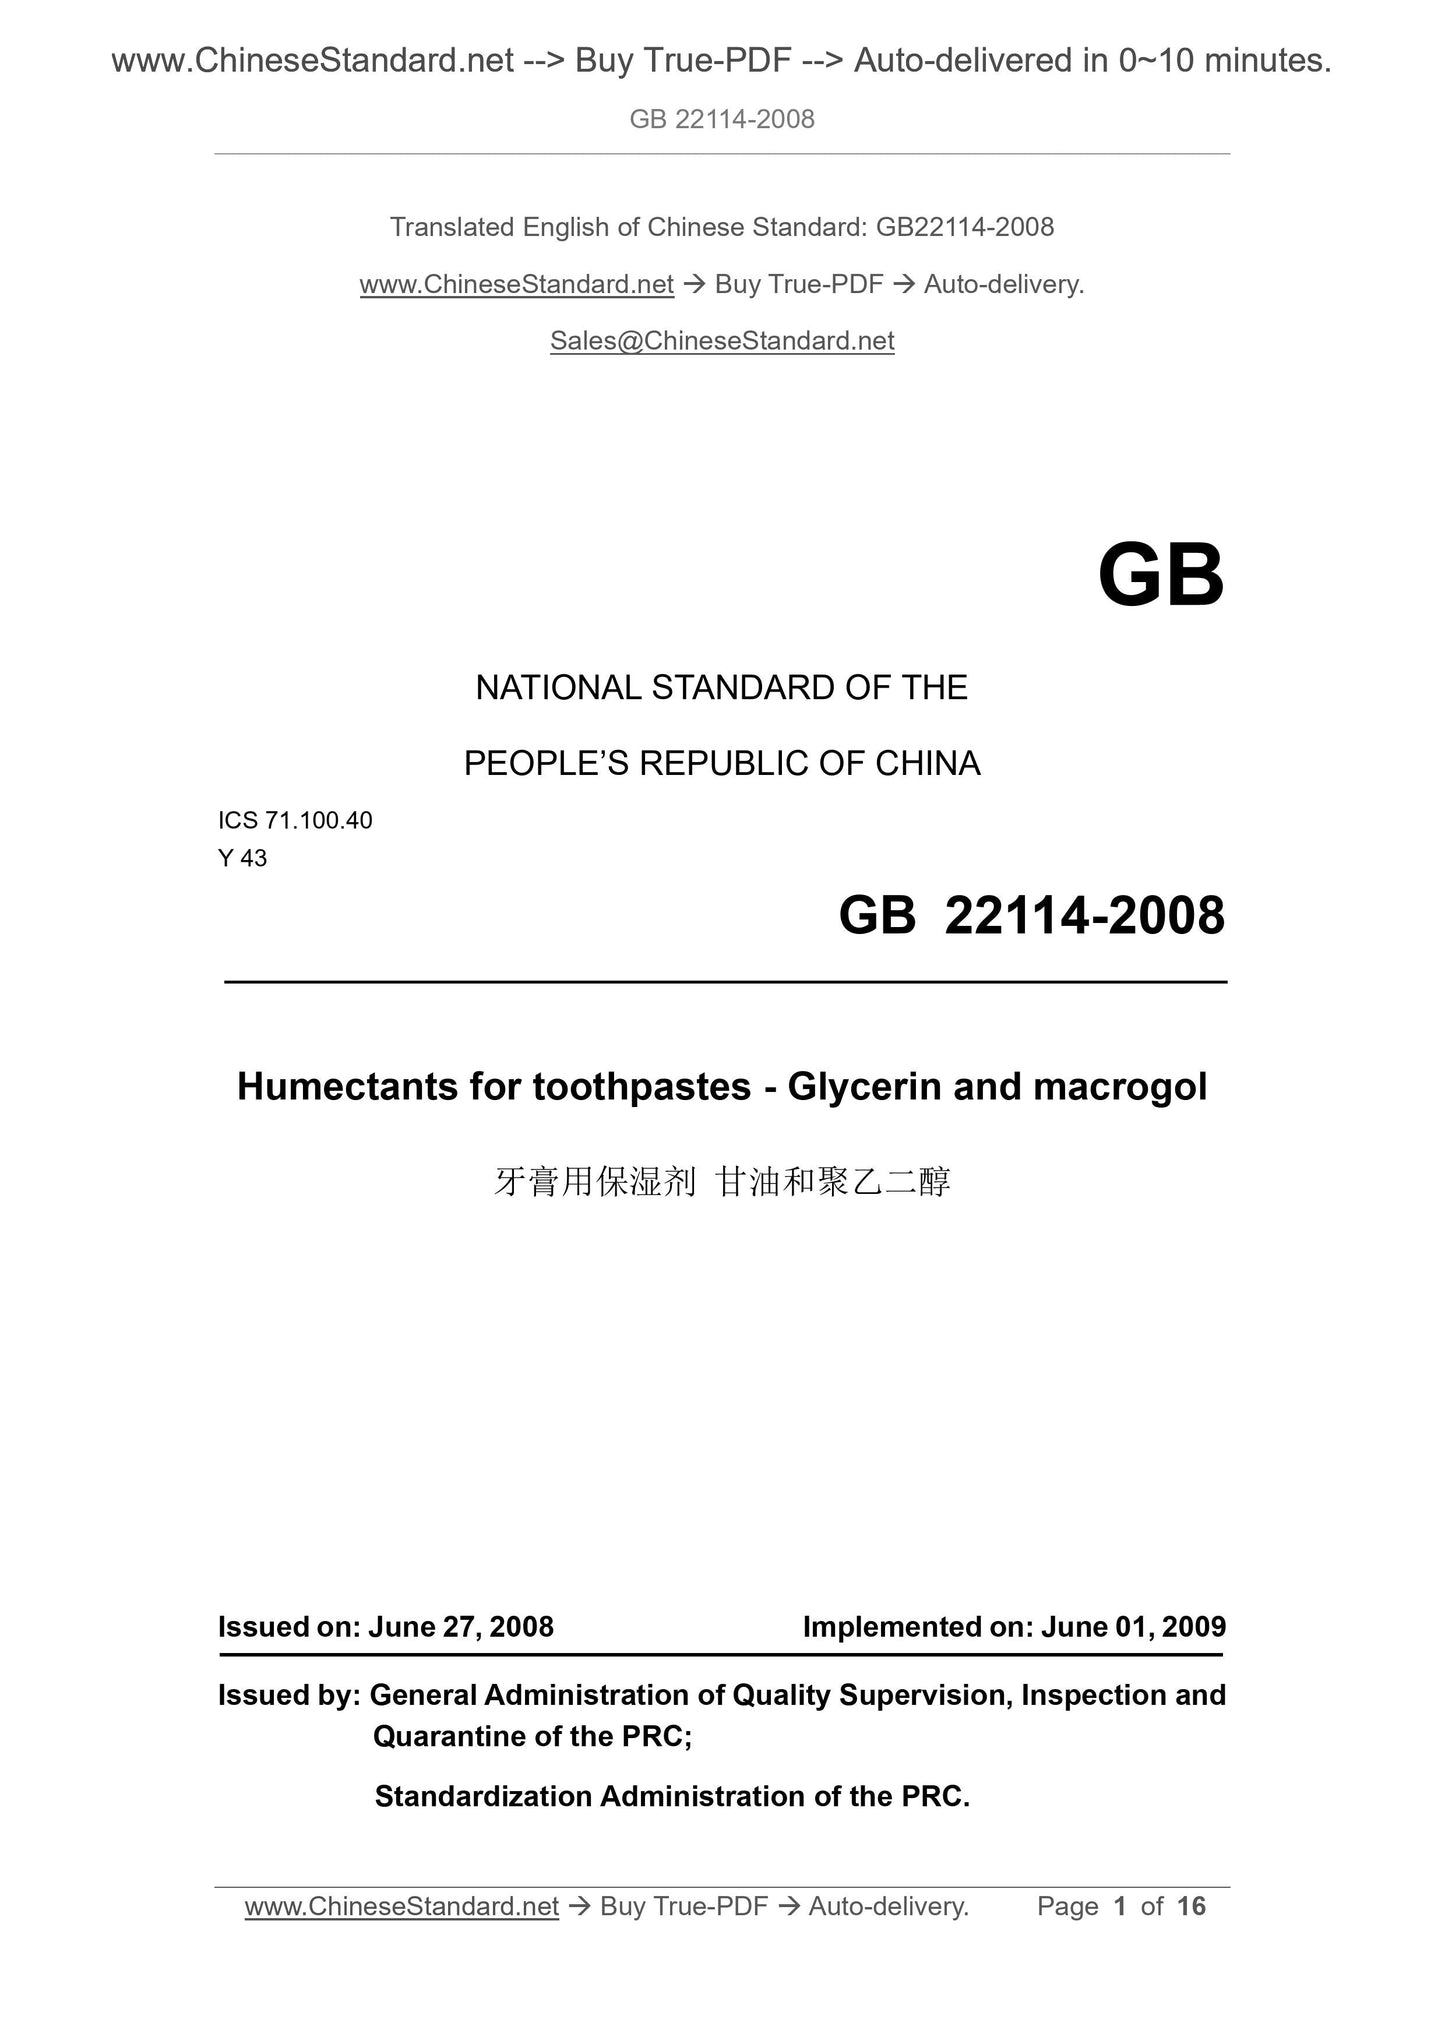 GB 22114-2008 Page 1